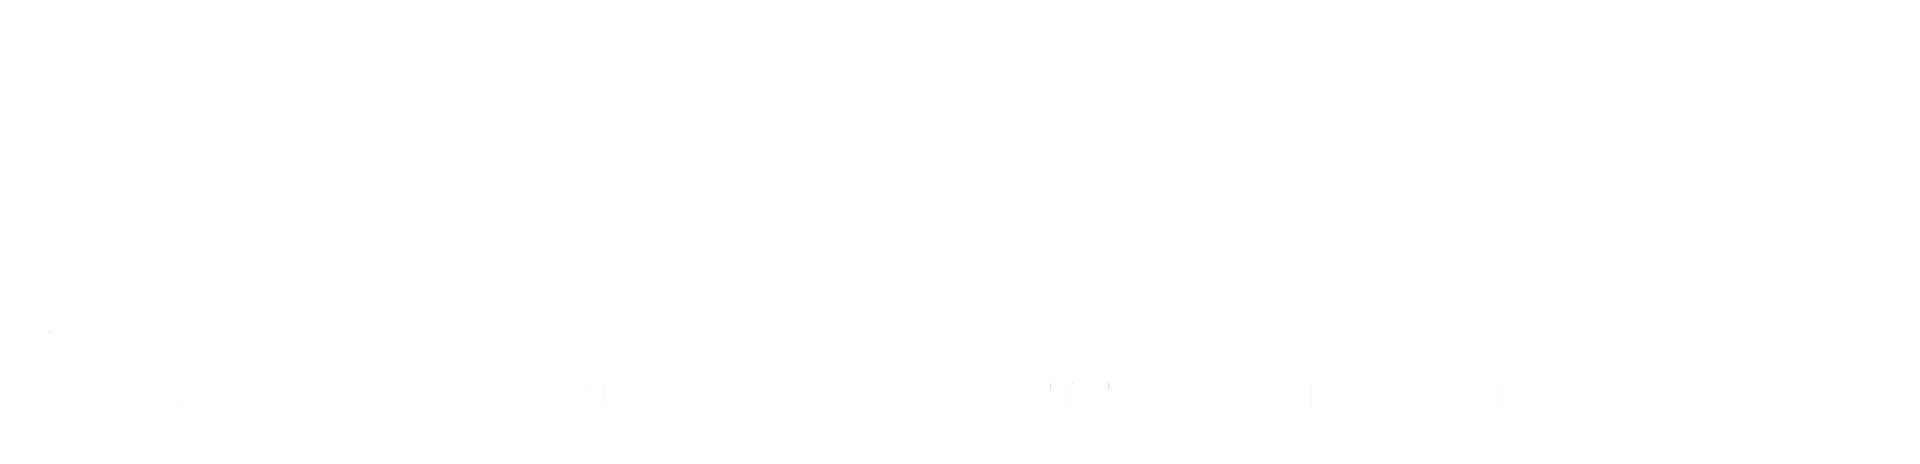 The Moore Family Funeral Homes Logo